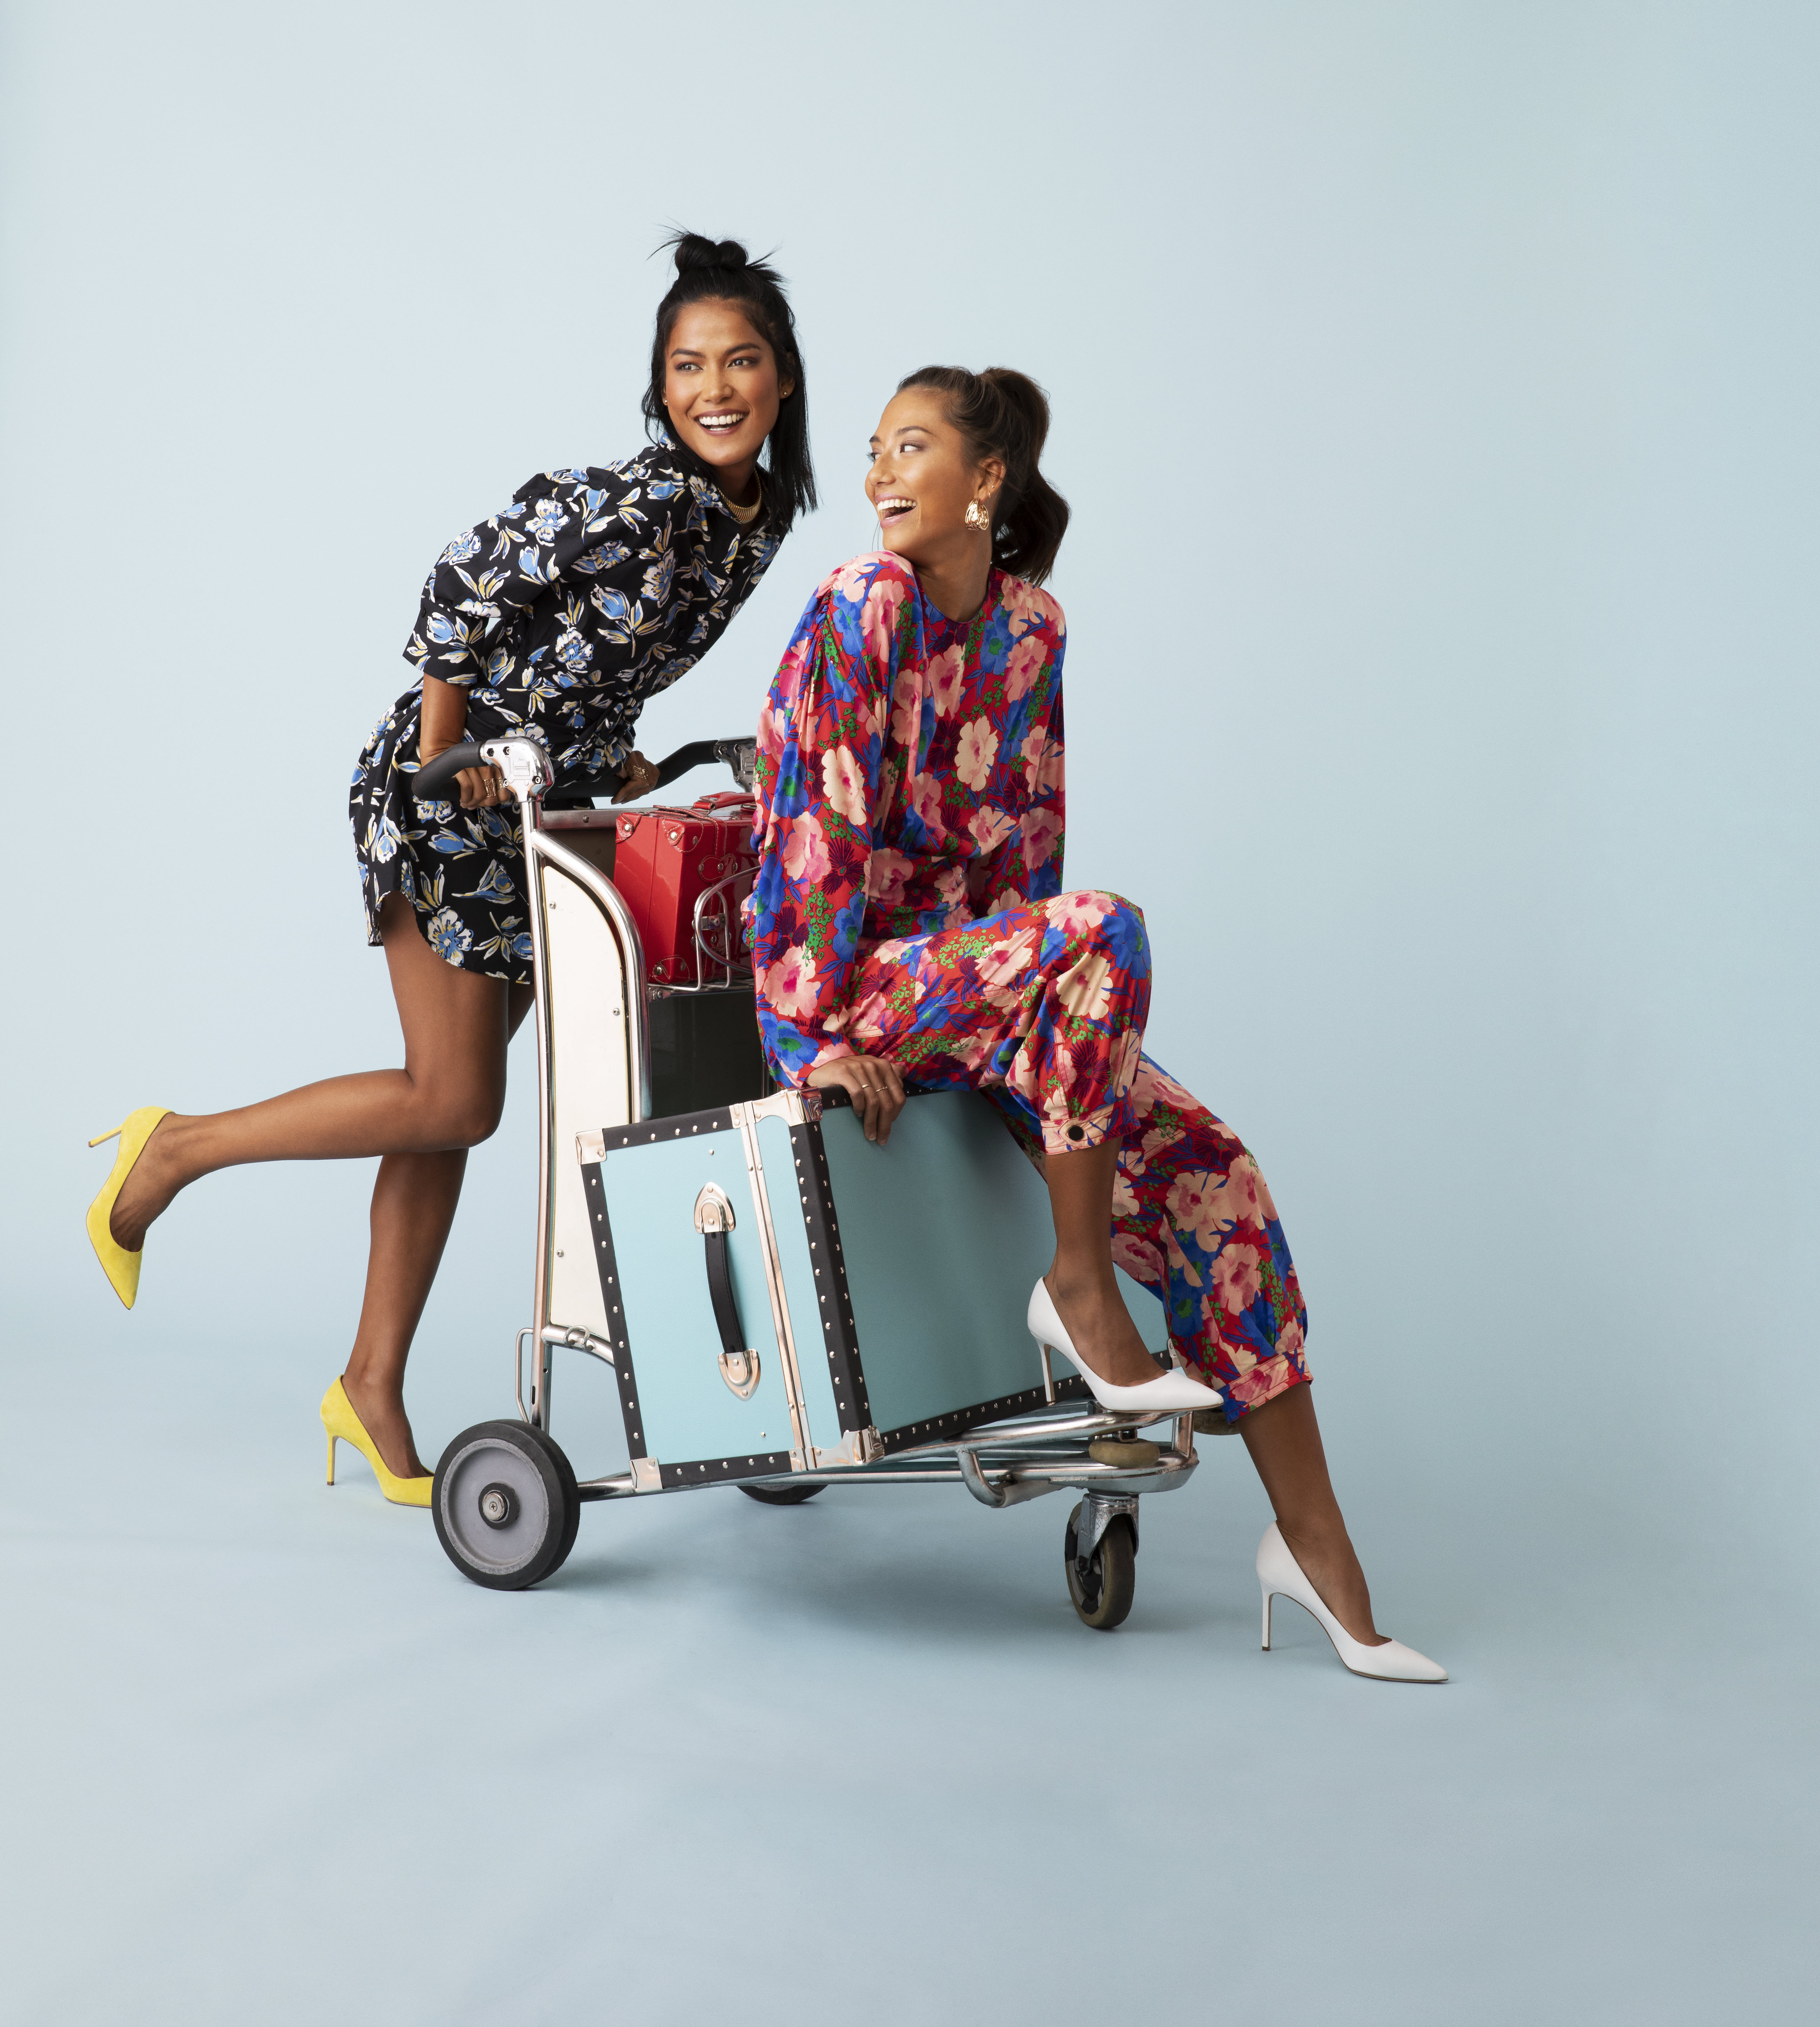 Two women sitting on a luggage cart